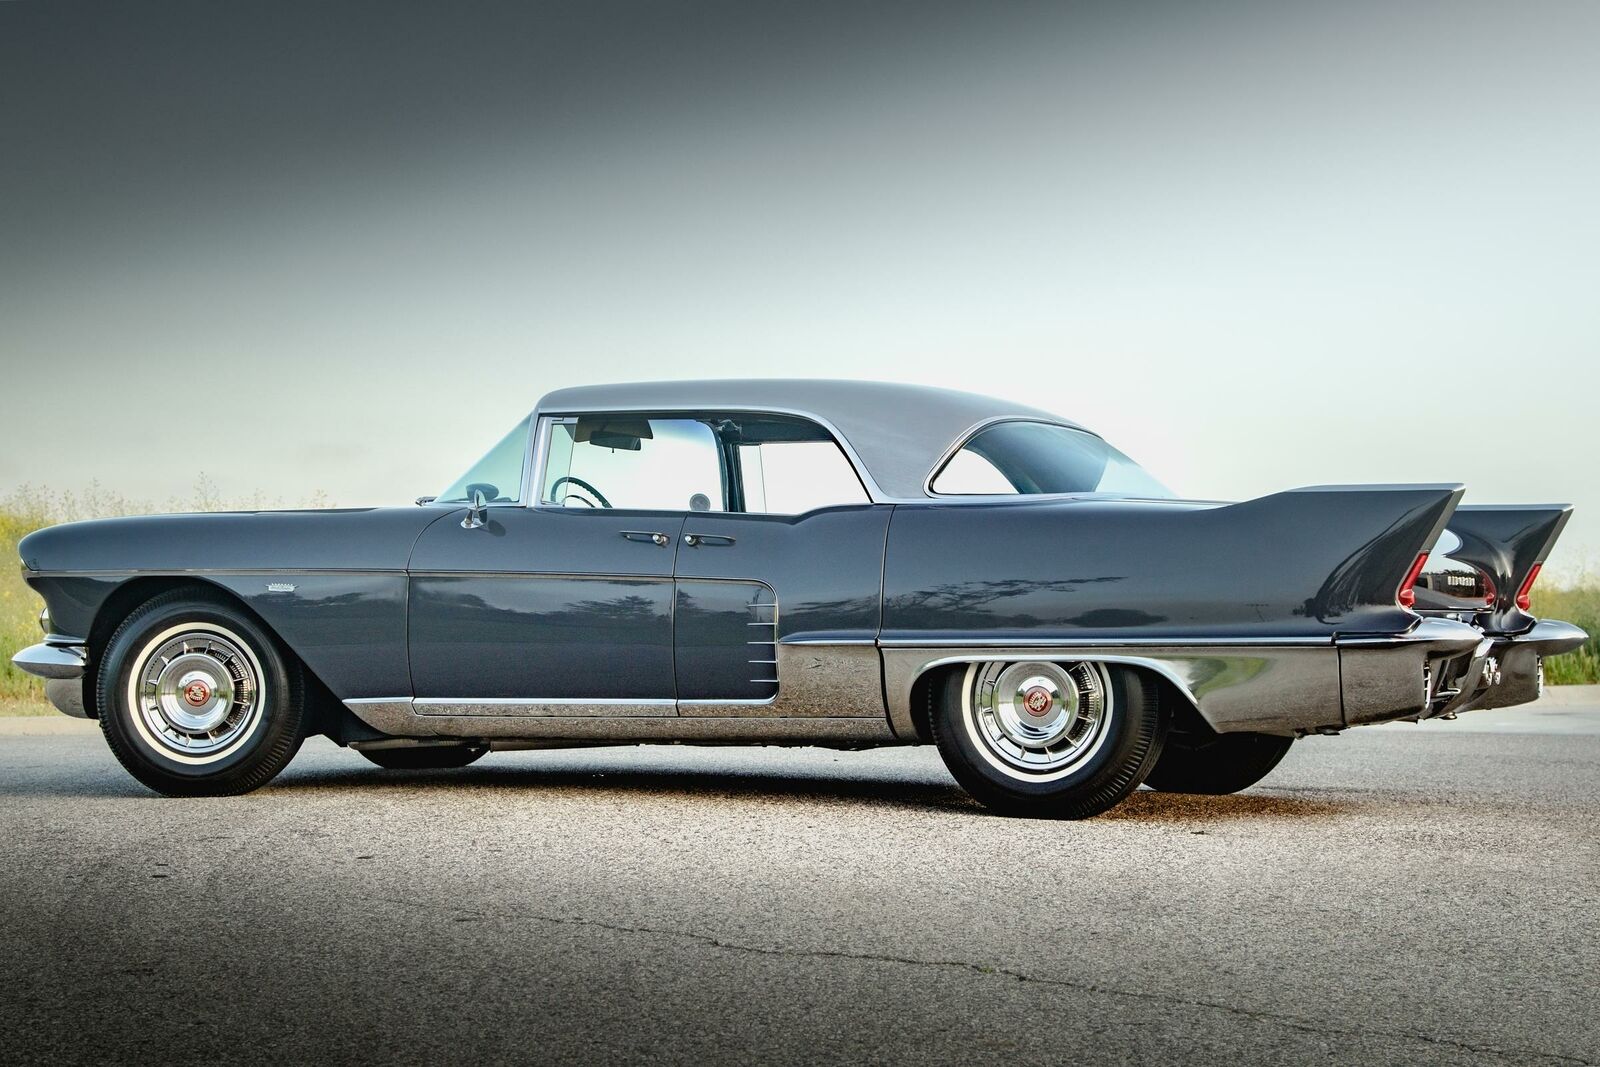 1958 Cadillac Eldorado Brougham Comes From A Time When Cars Were Art Carscoops